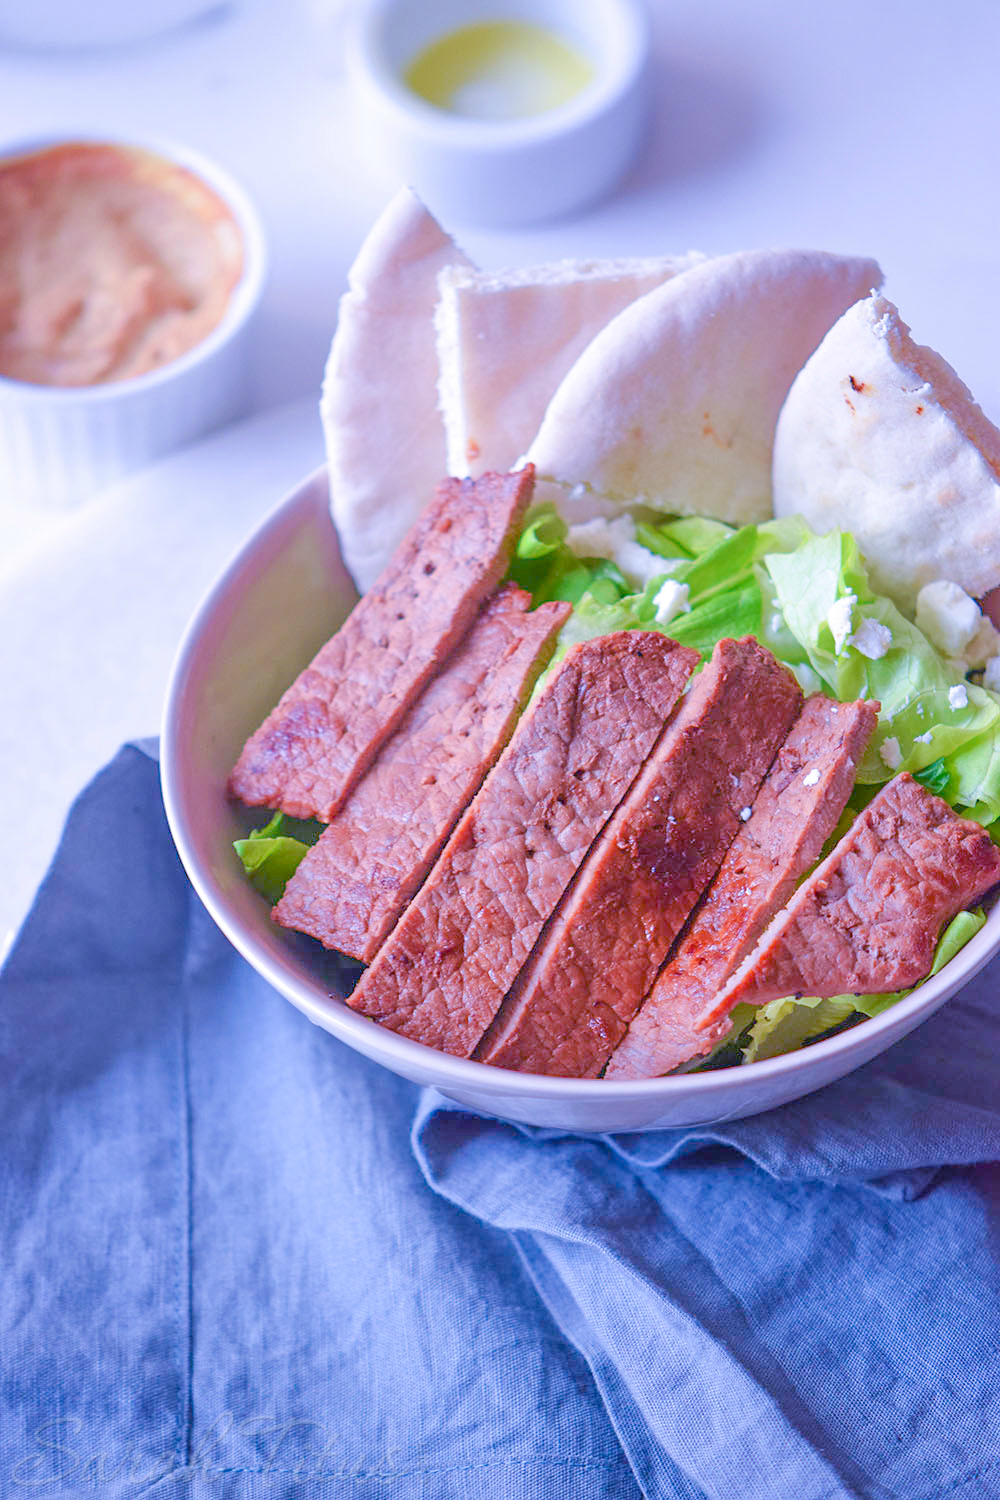 Lettuce, pita, Feta cheese and steak in a bowl for the Italian bowl